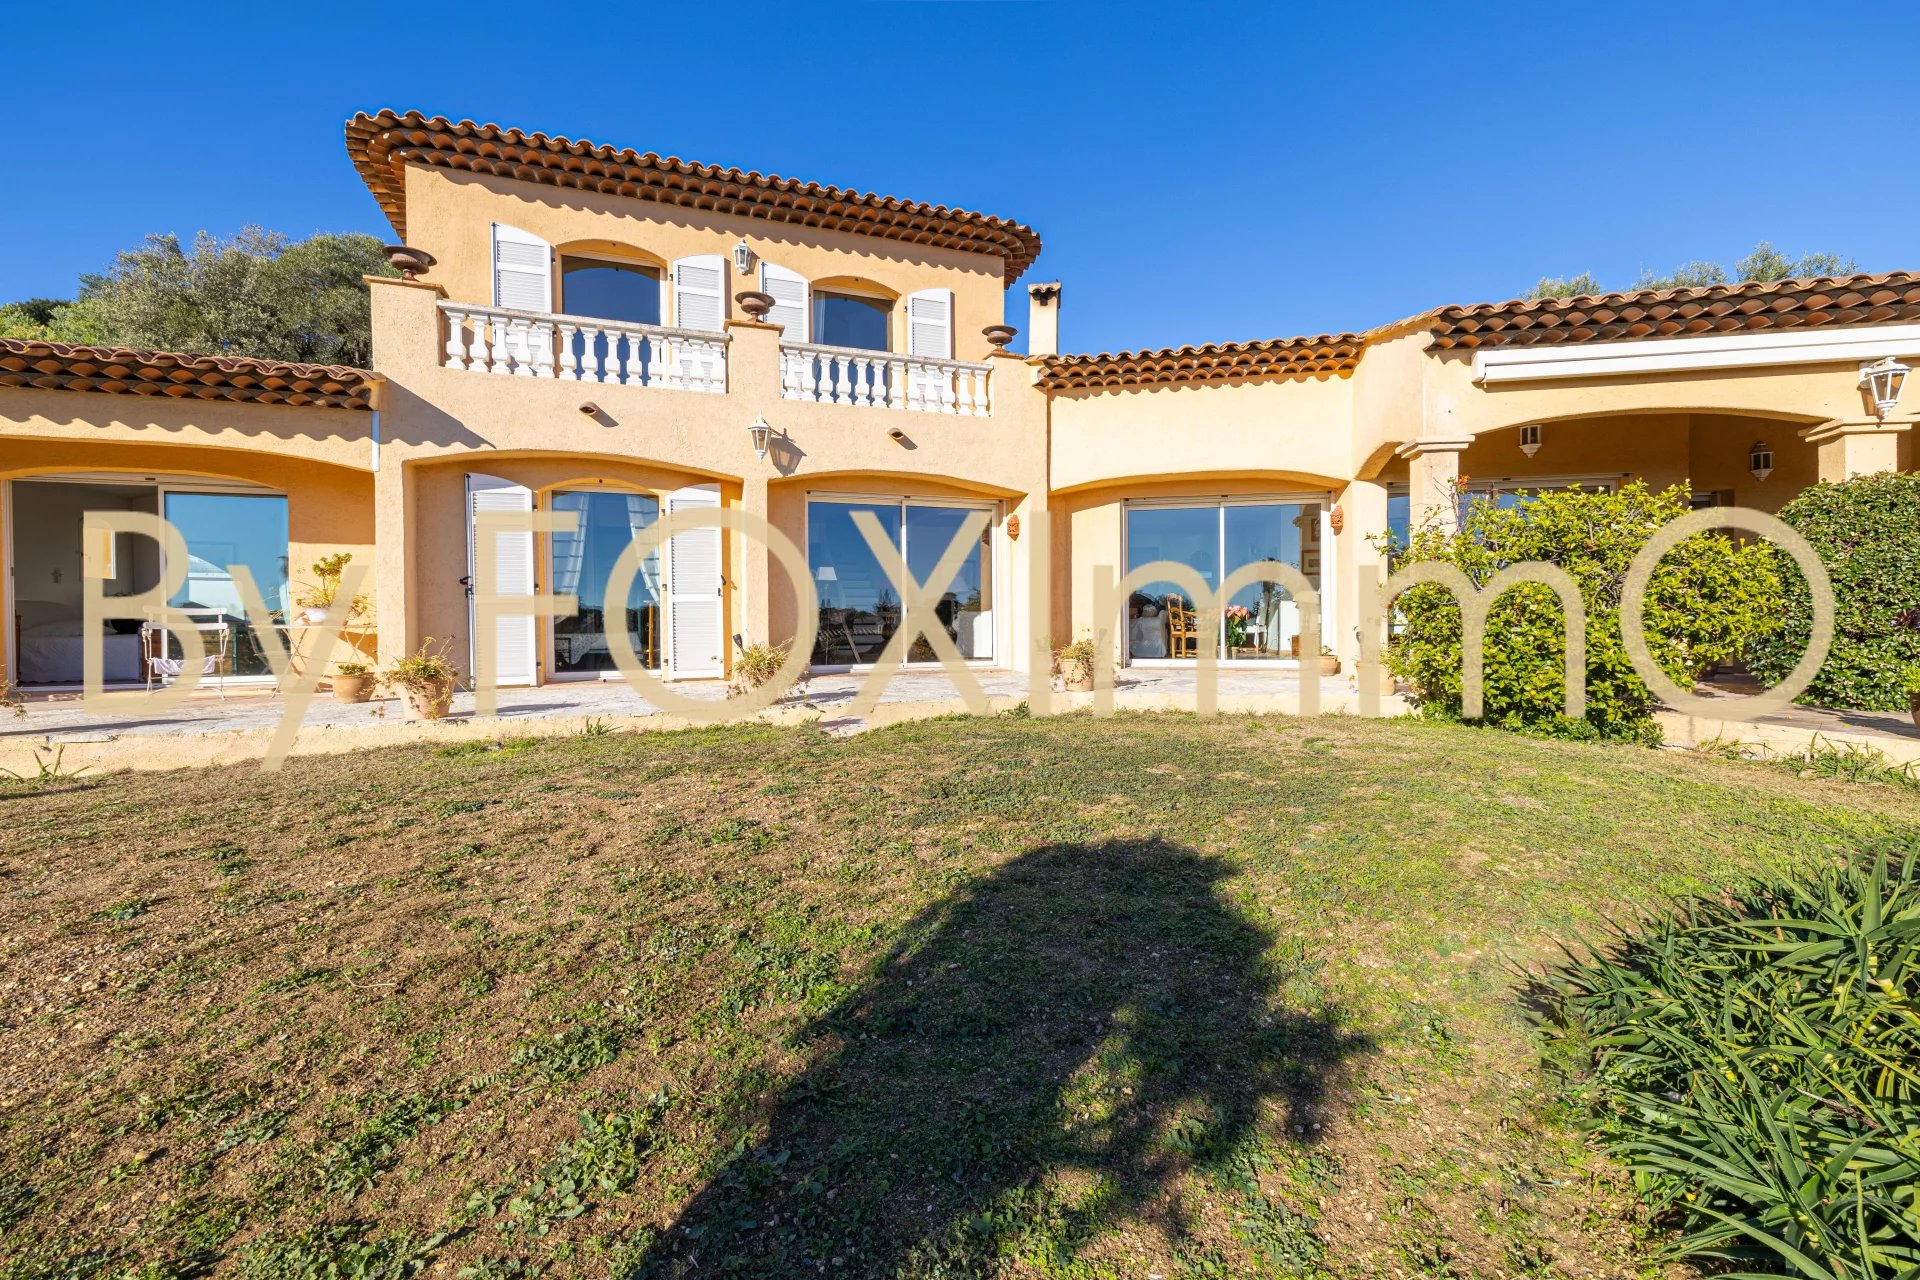 Antibes Rastines, Luxury estate with low charges, Beautiful detached villa, recent, perfect condition, sea view, Absolute peace and quiet